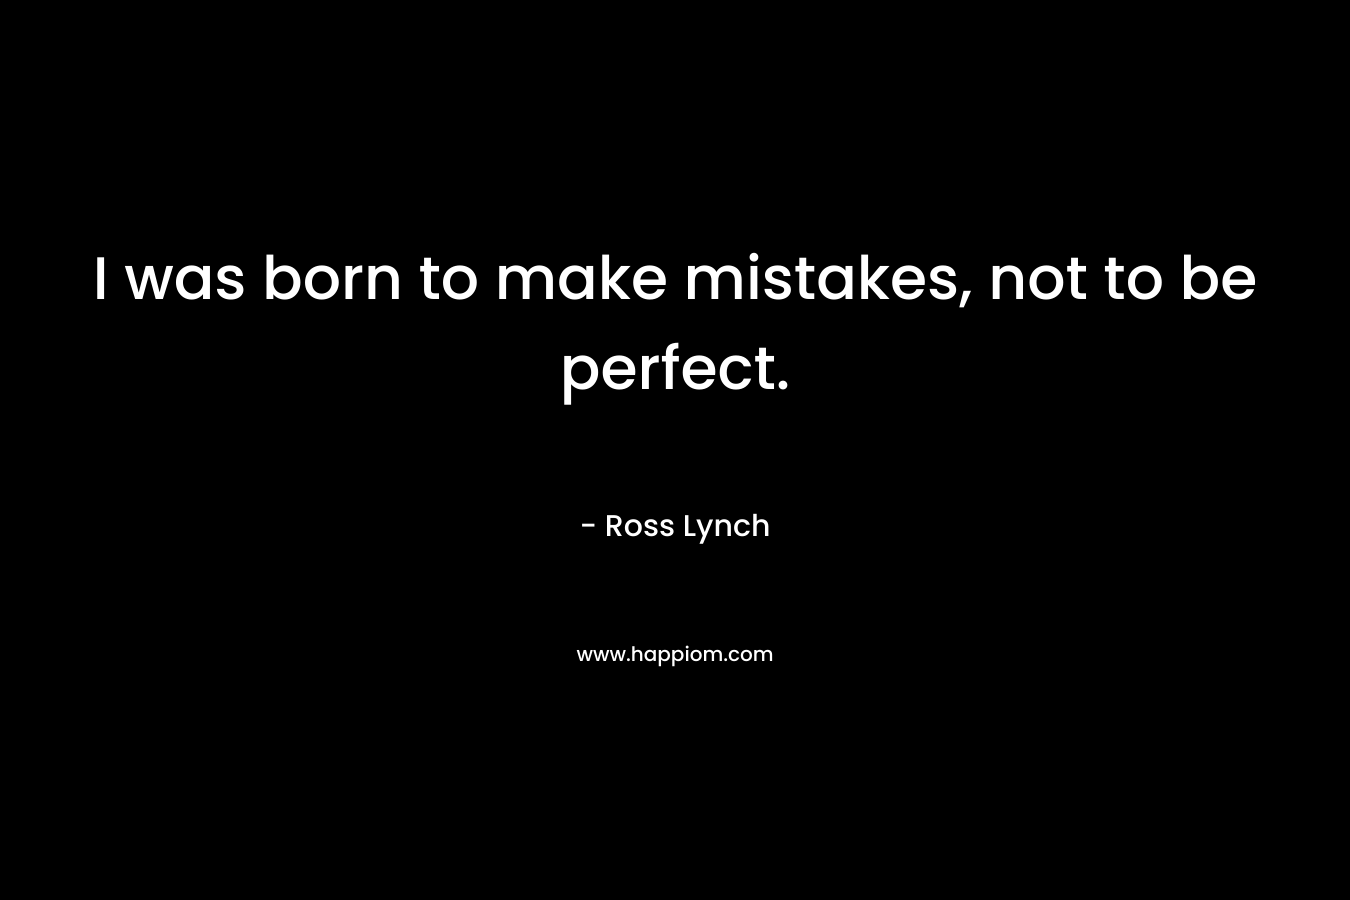 I was born to make mistakes, not to be perfect. – Ross Lynch